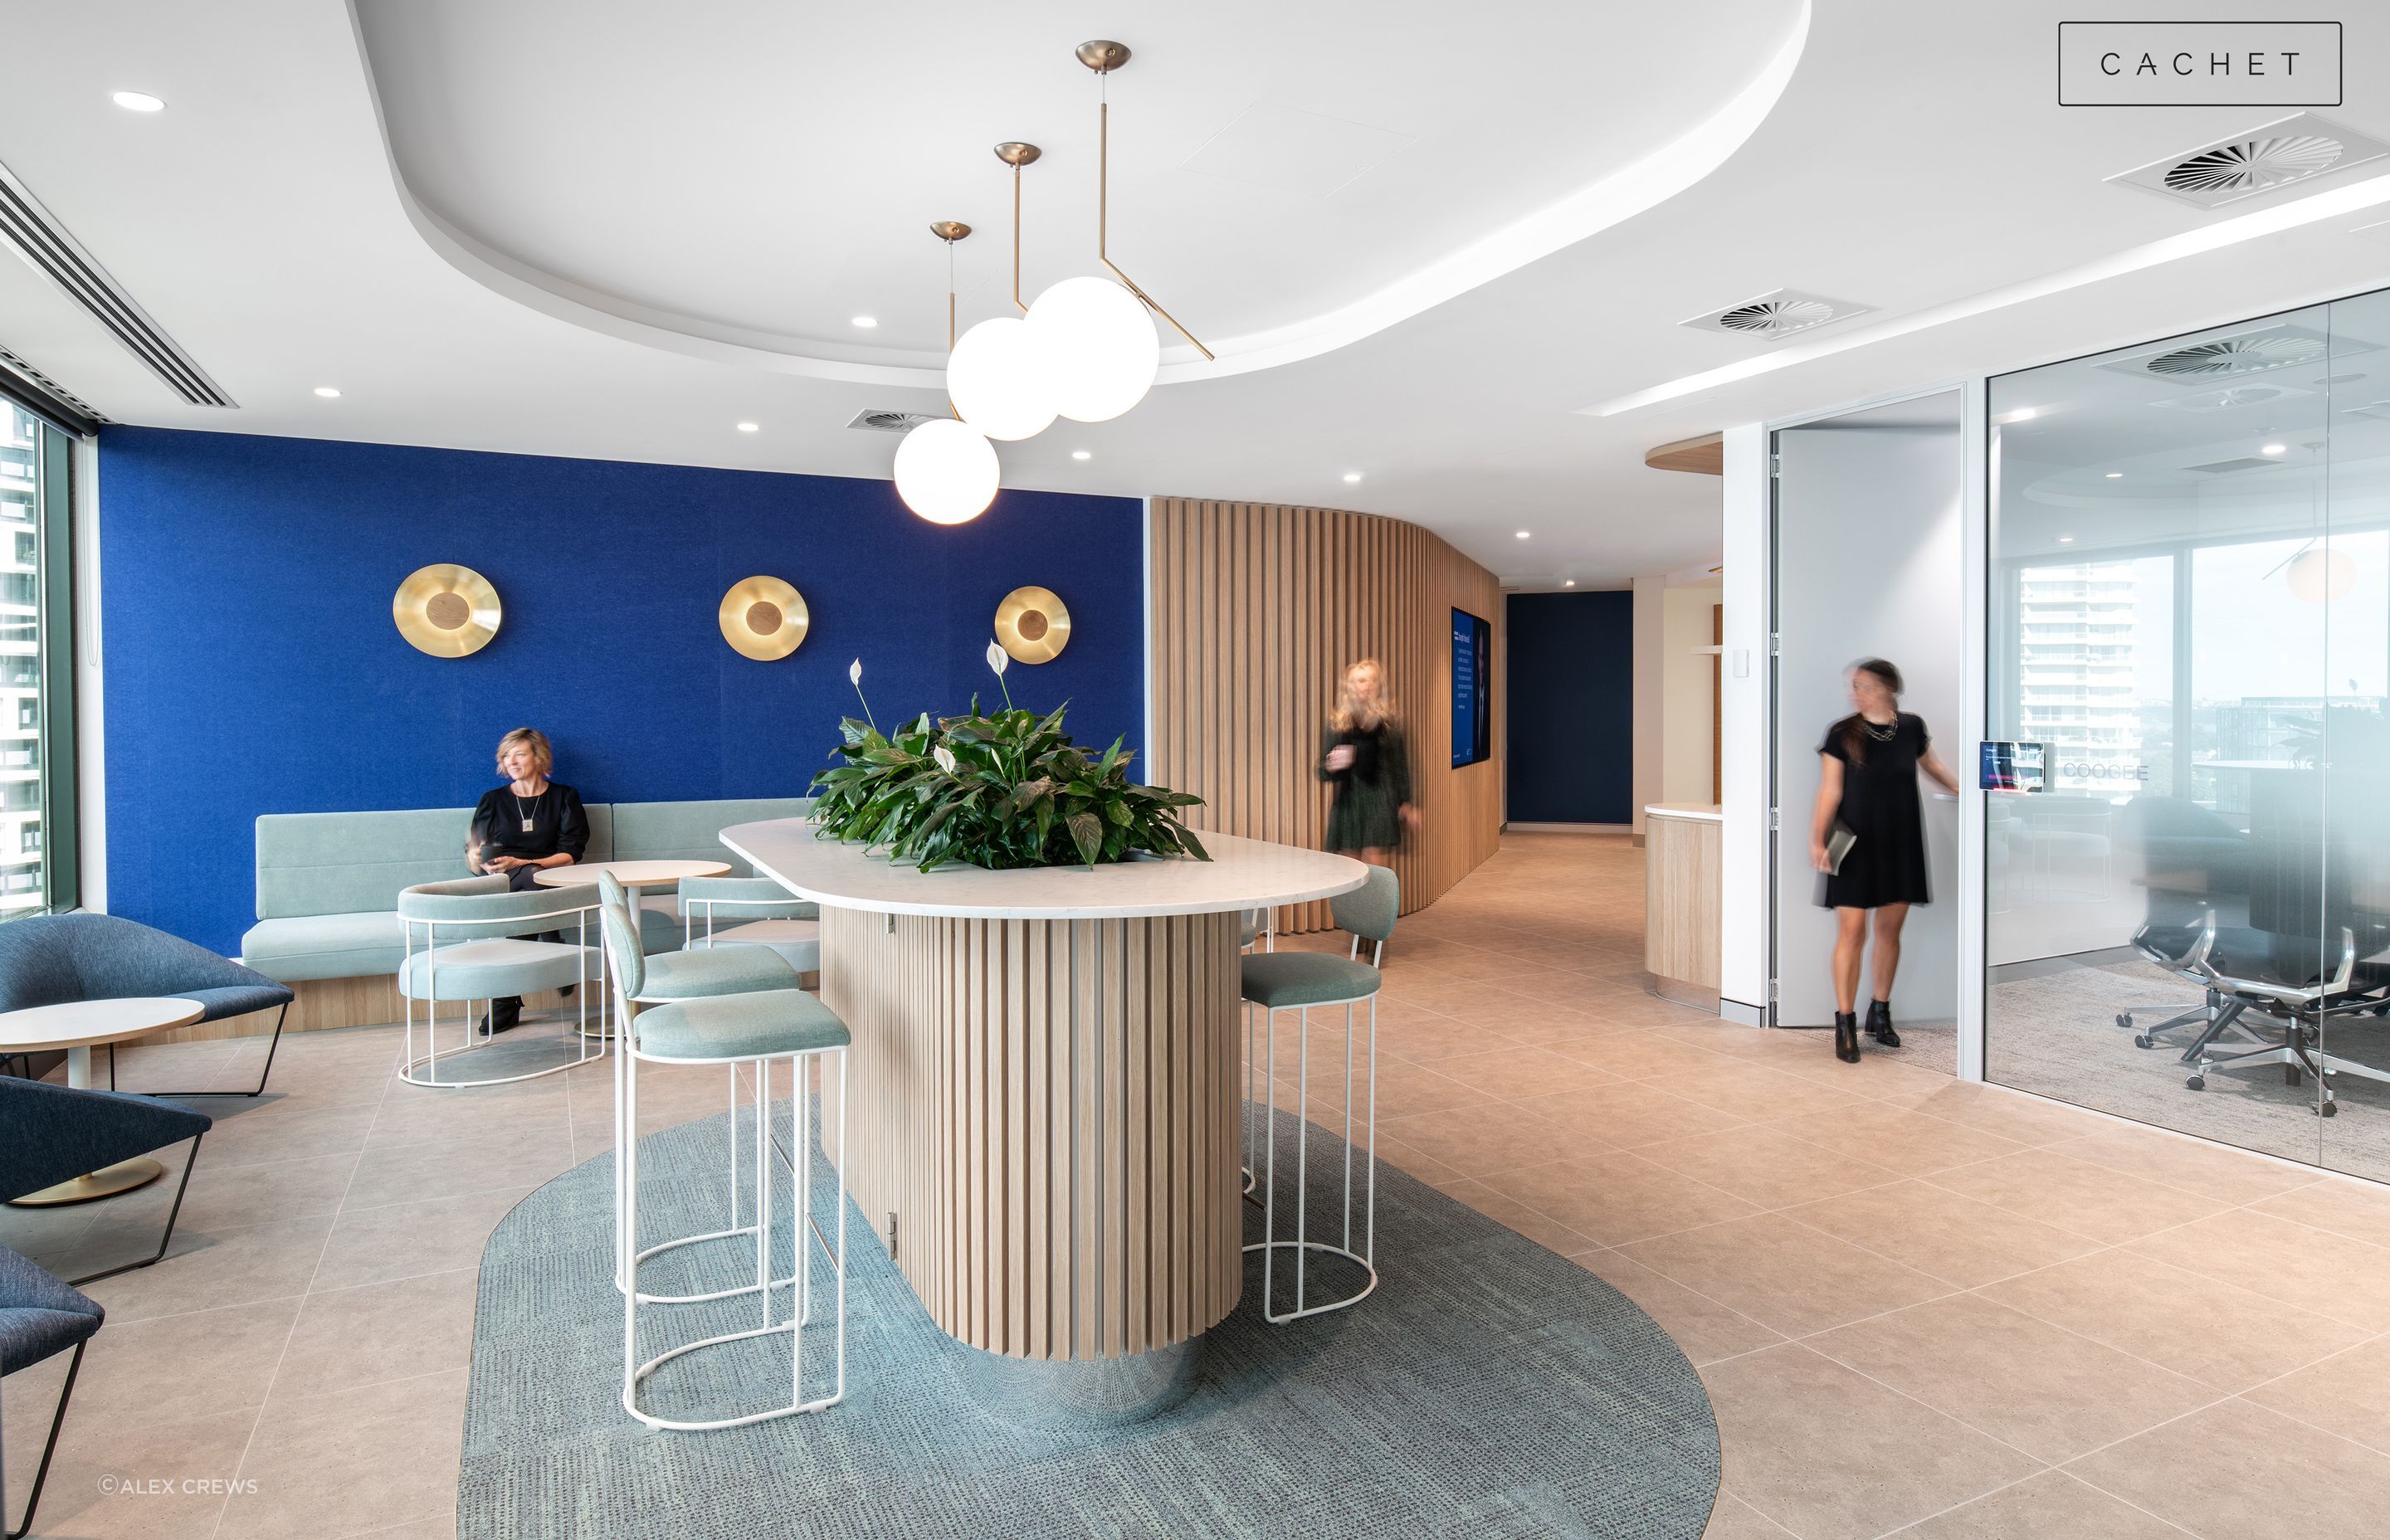 The FTI Sydney fit-out is light, bright and airy. Image credit: Alex Crews.